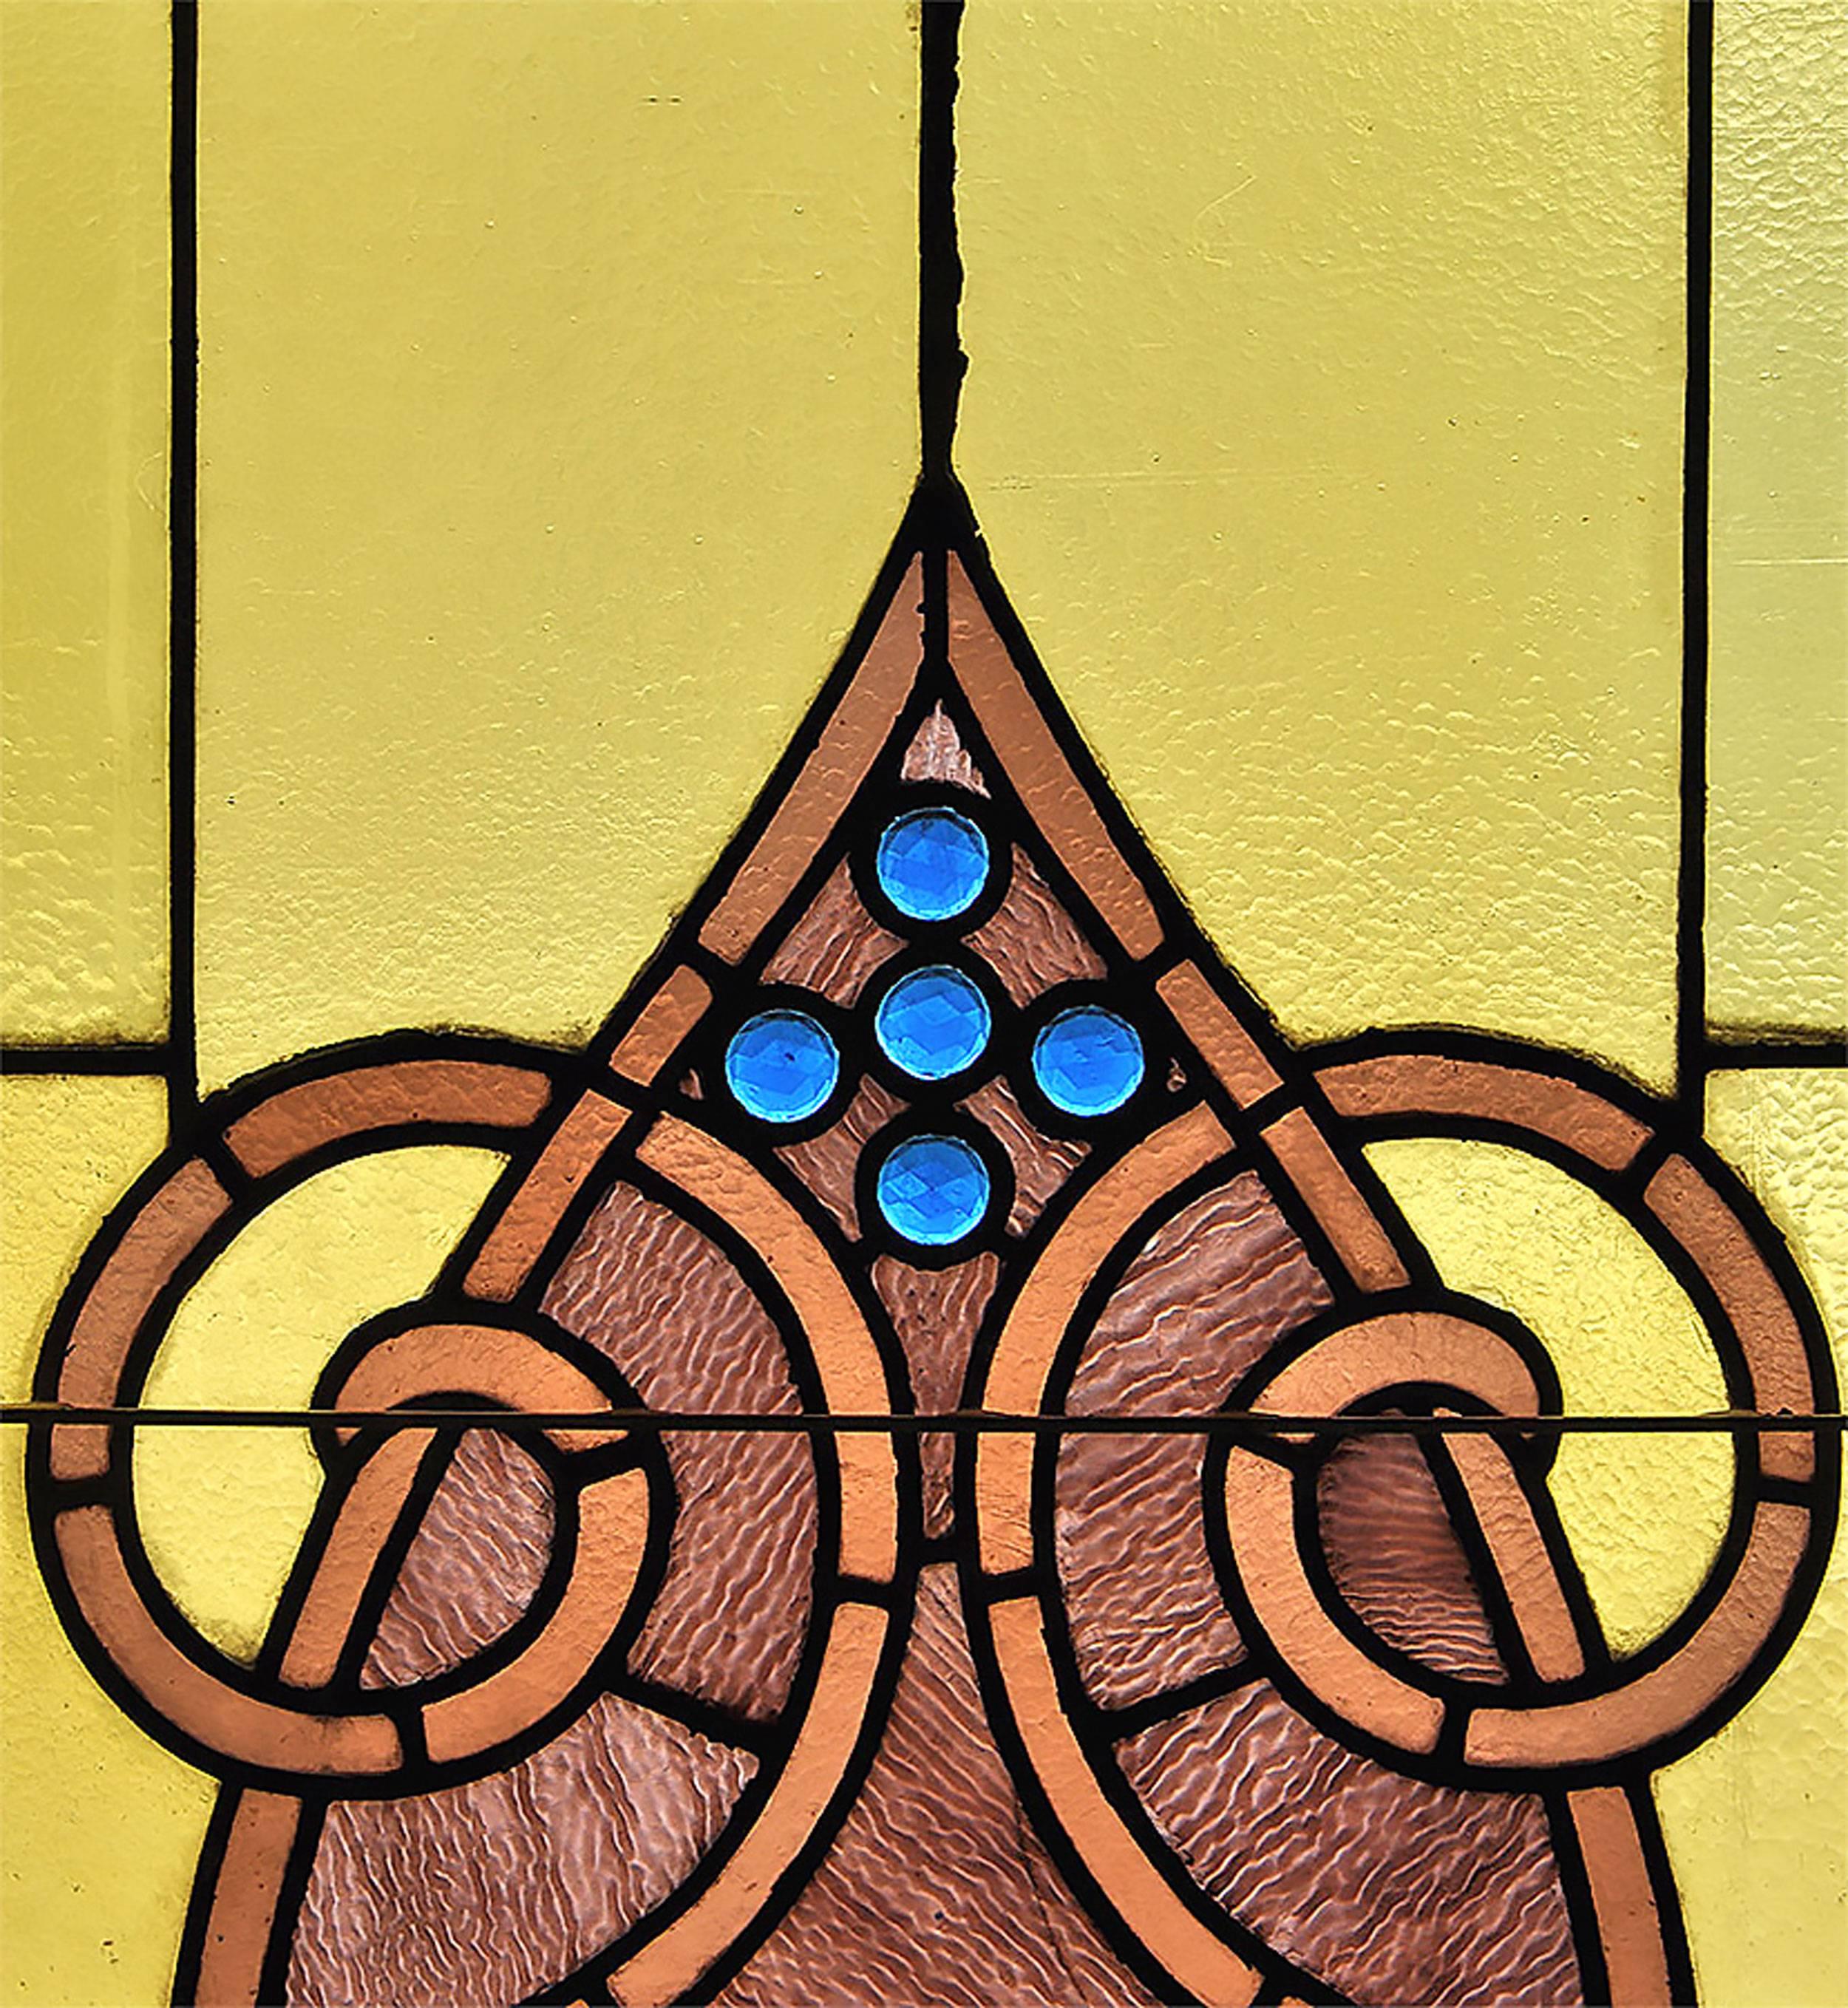 These gorgeous stained glass arched windows shine with a multitude of colors: mottled greens and browns toward the top and bottom compliment the more vibrant turquoise and lavender at the center. Each window was carefully removed from a church in